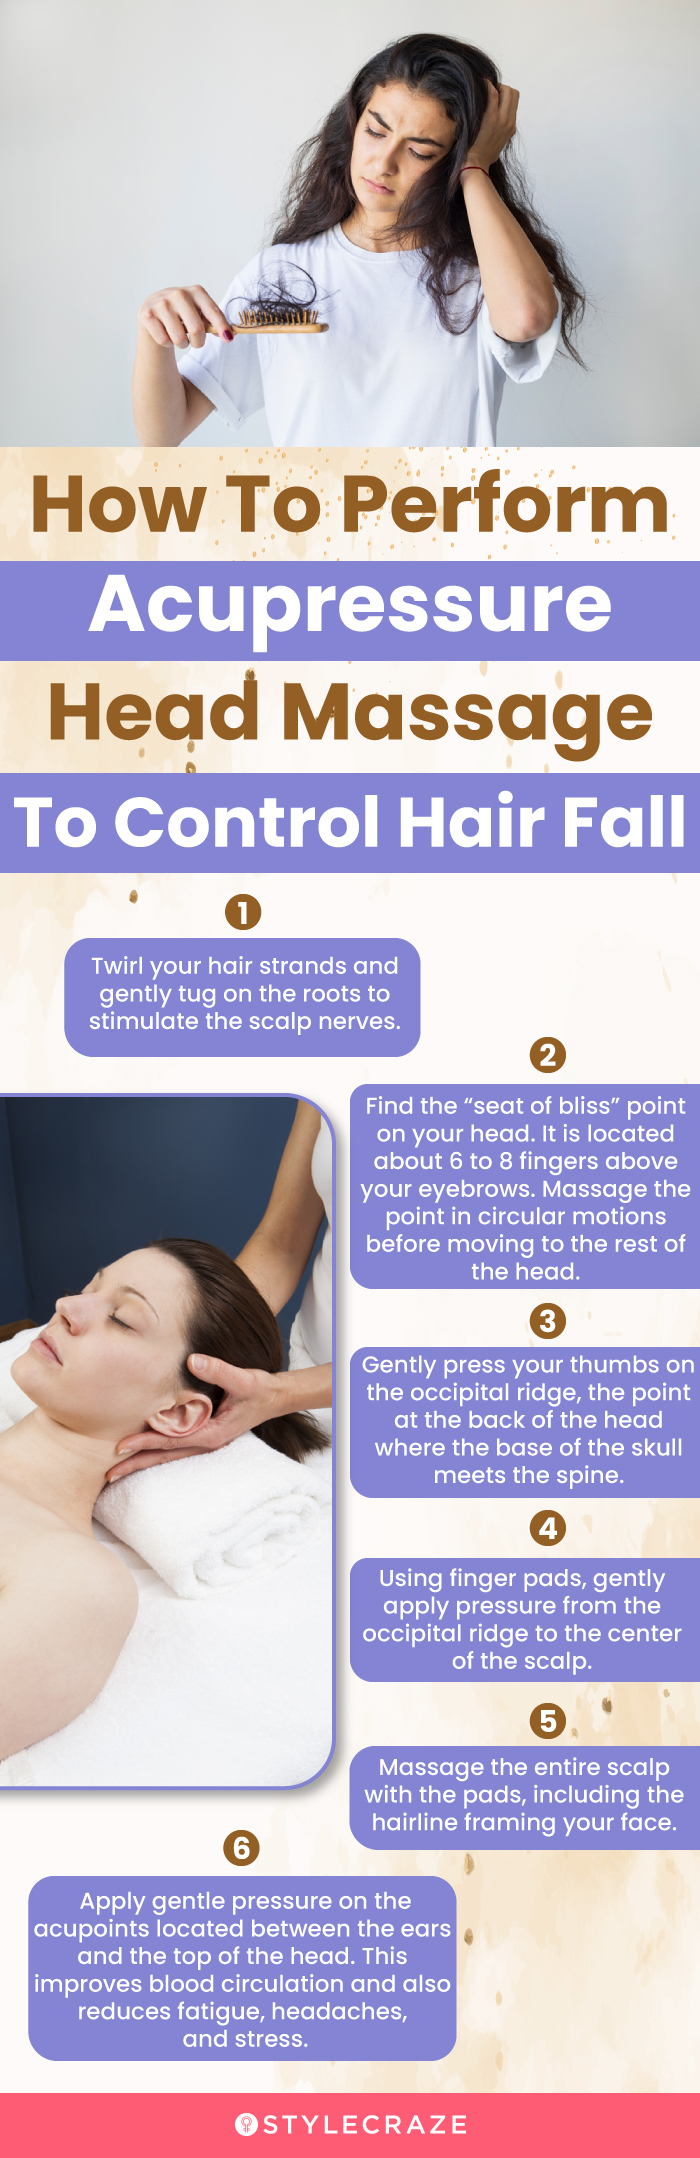 how to perform acupressure head massage to control hair fall (infographic)